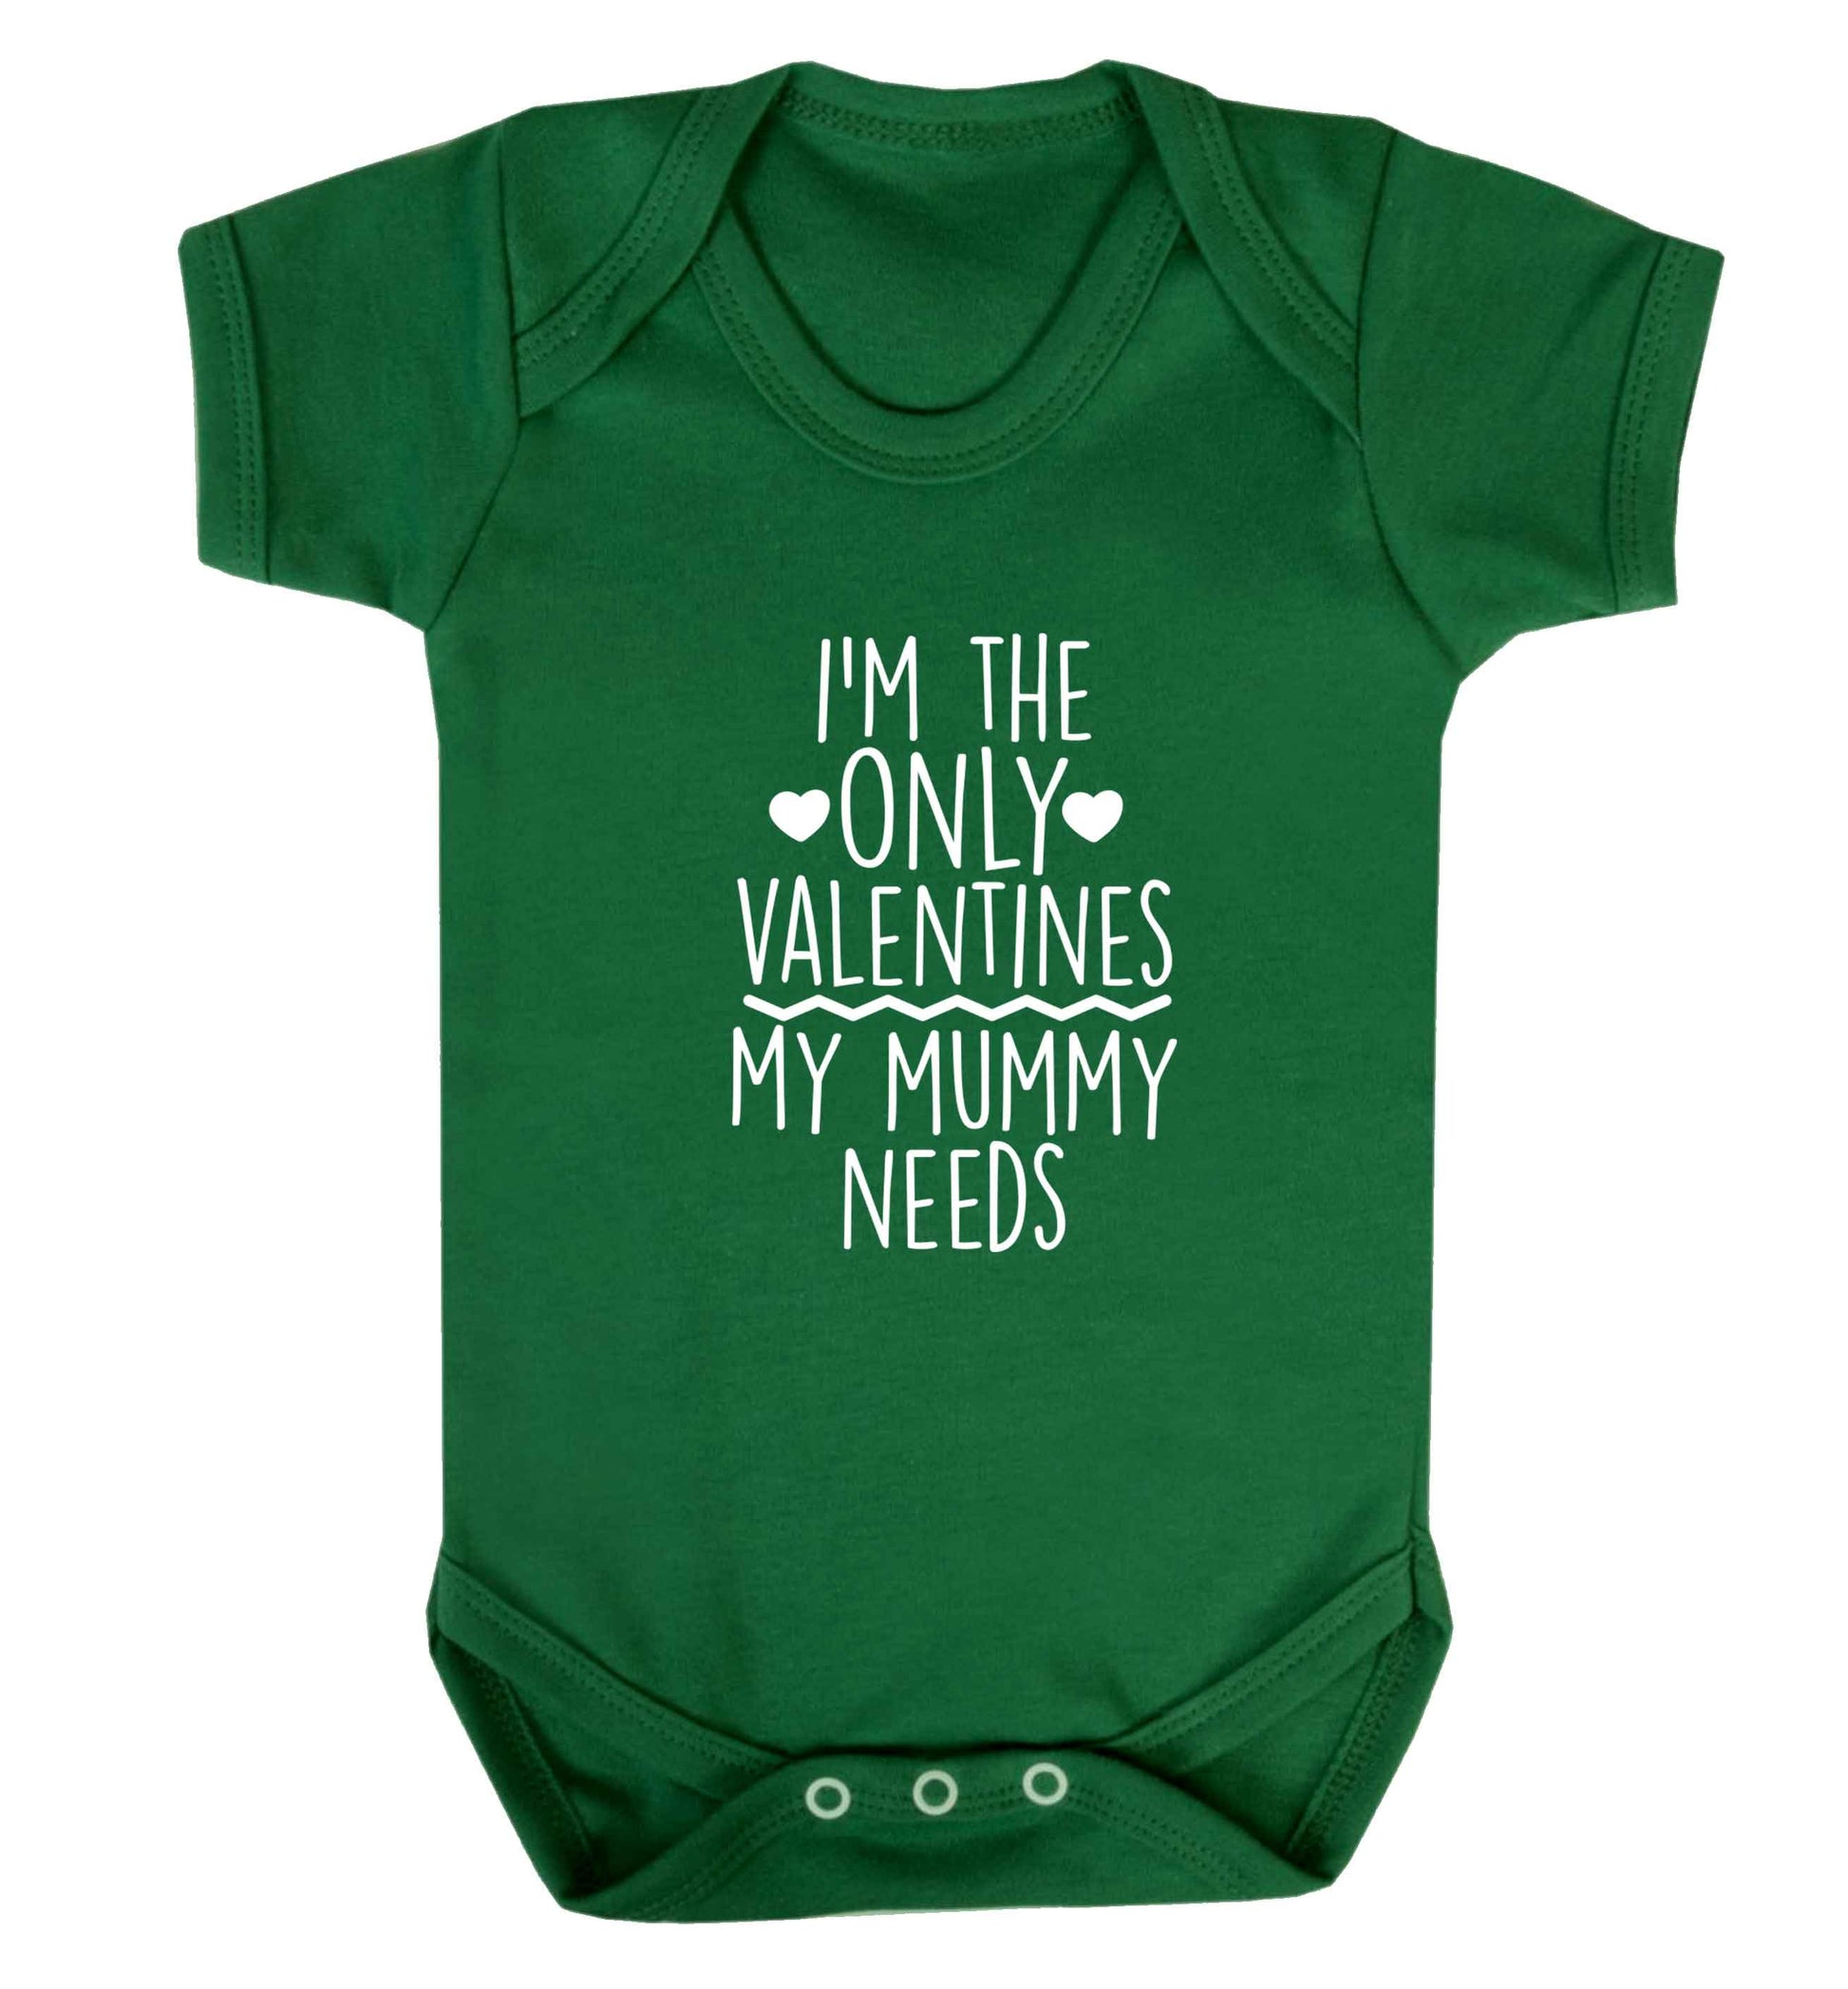 I'm the only valentines my mummy needs baby vest green 18-24 months